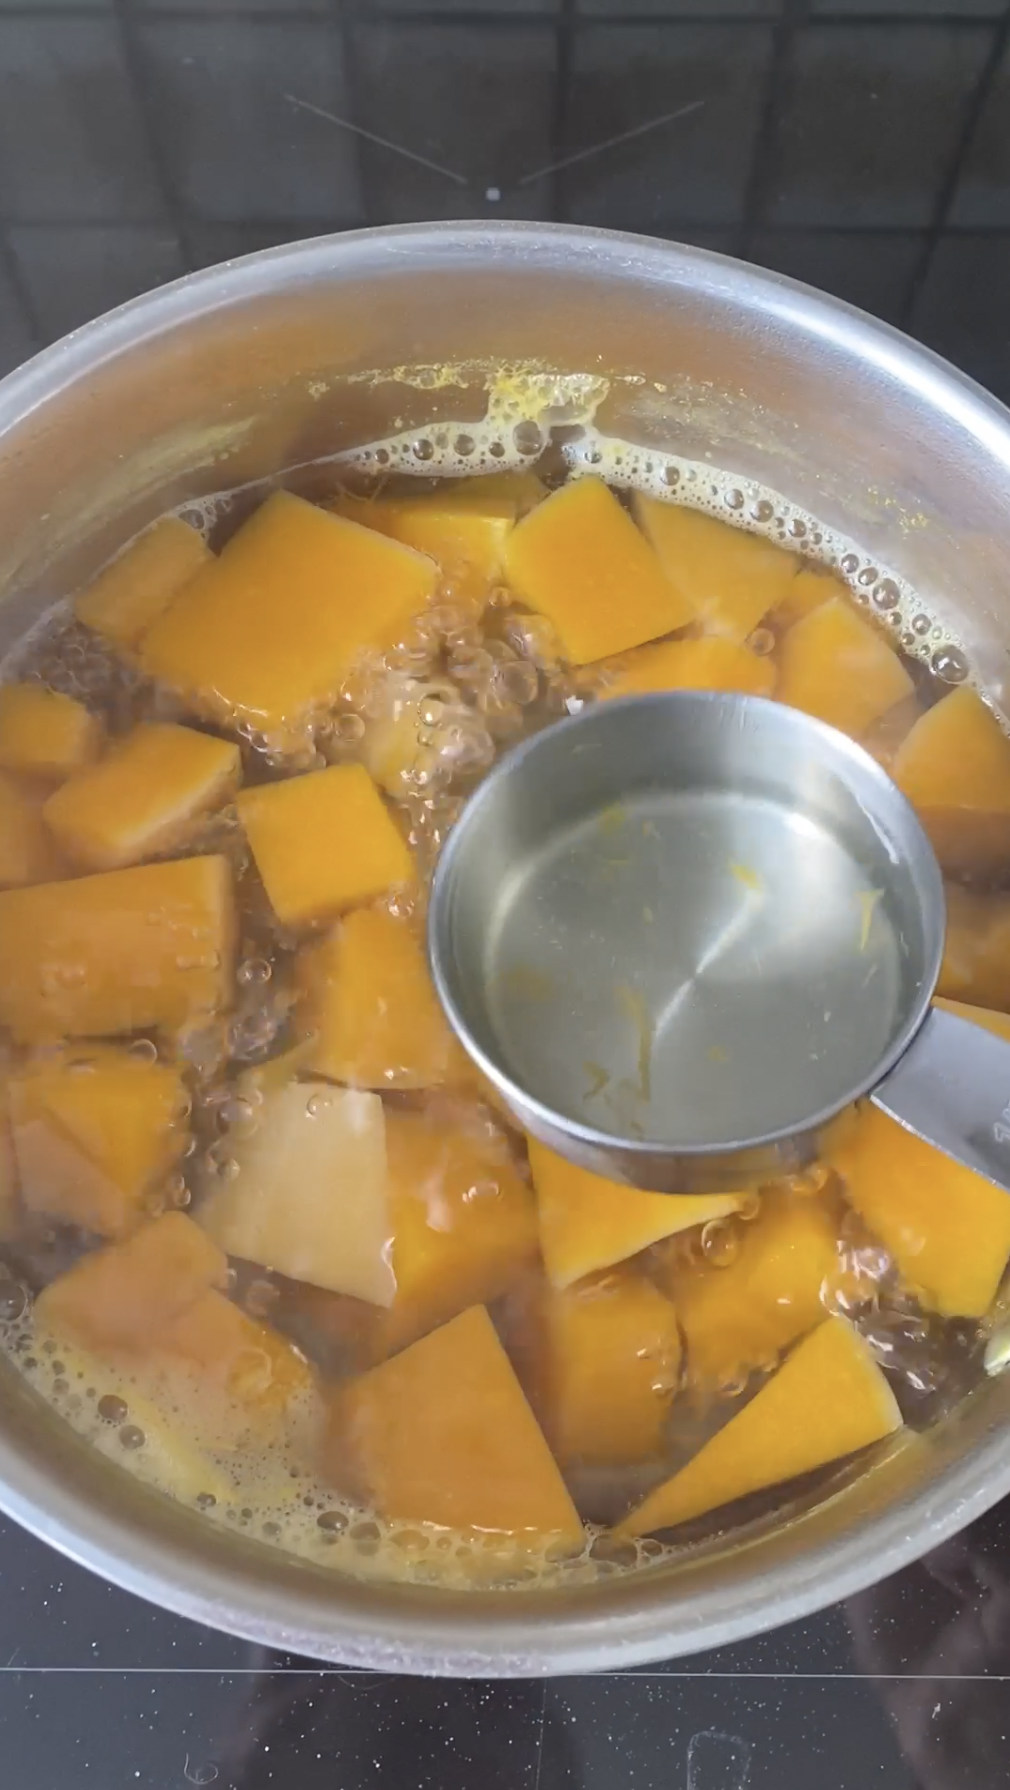 A cup hold by a hand reserving some cooking water in a pot with butternut squash cubes.